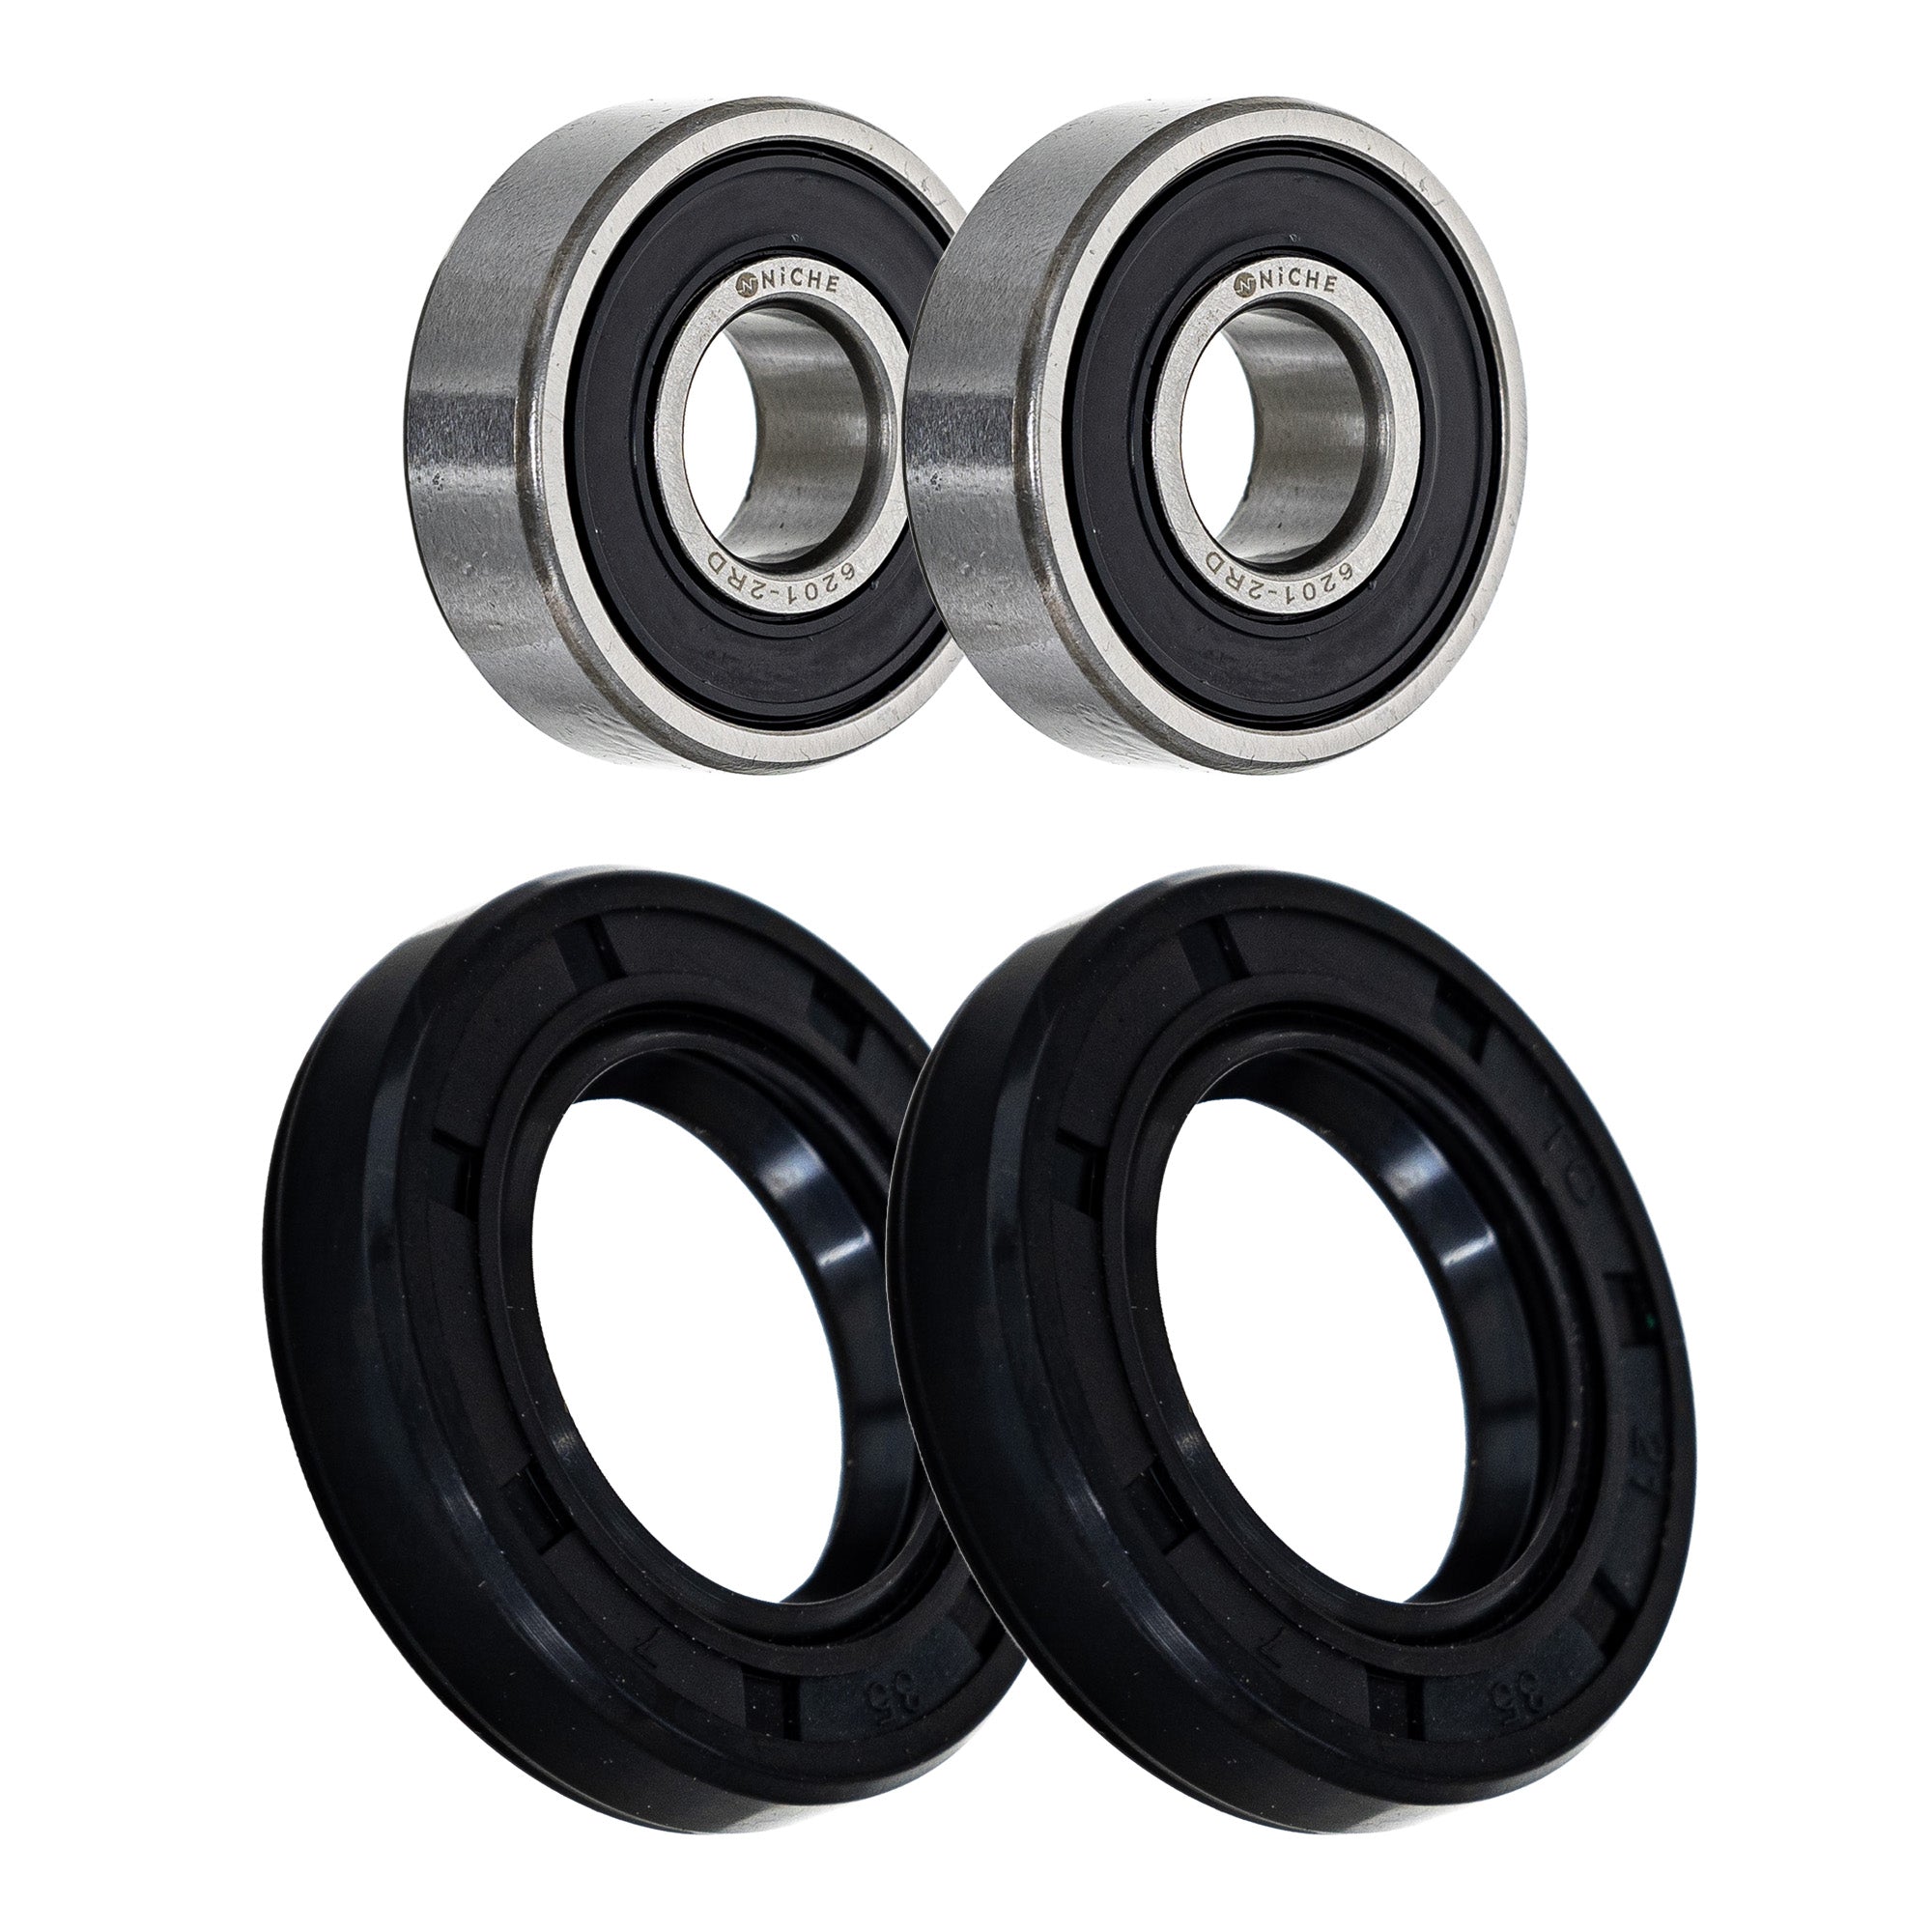 Wheel Bearing Seal Kit for zOTHER RM85 RM80 Monkey Expert NICHE MK1009120